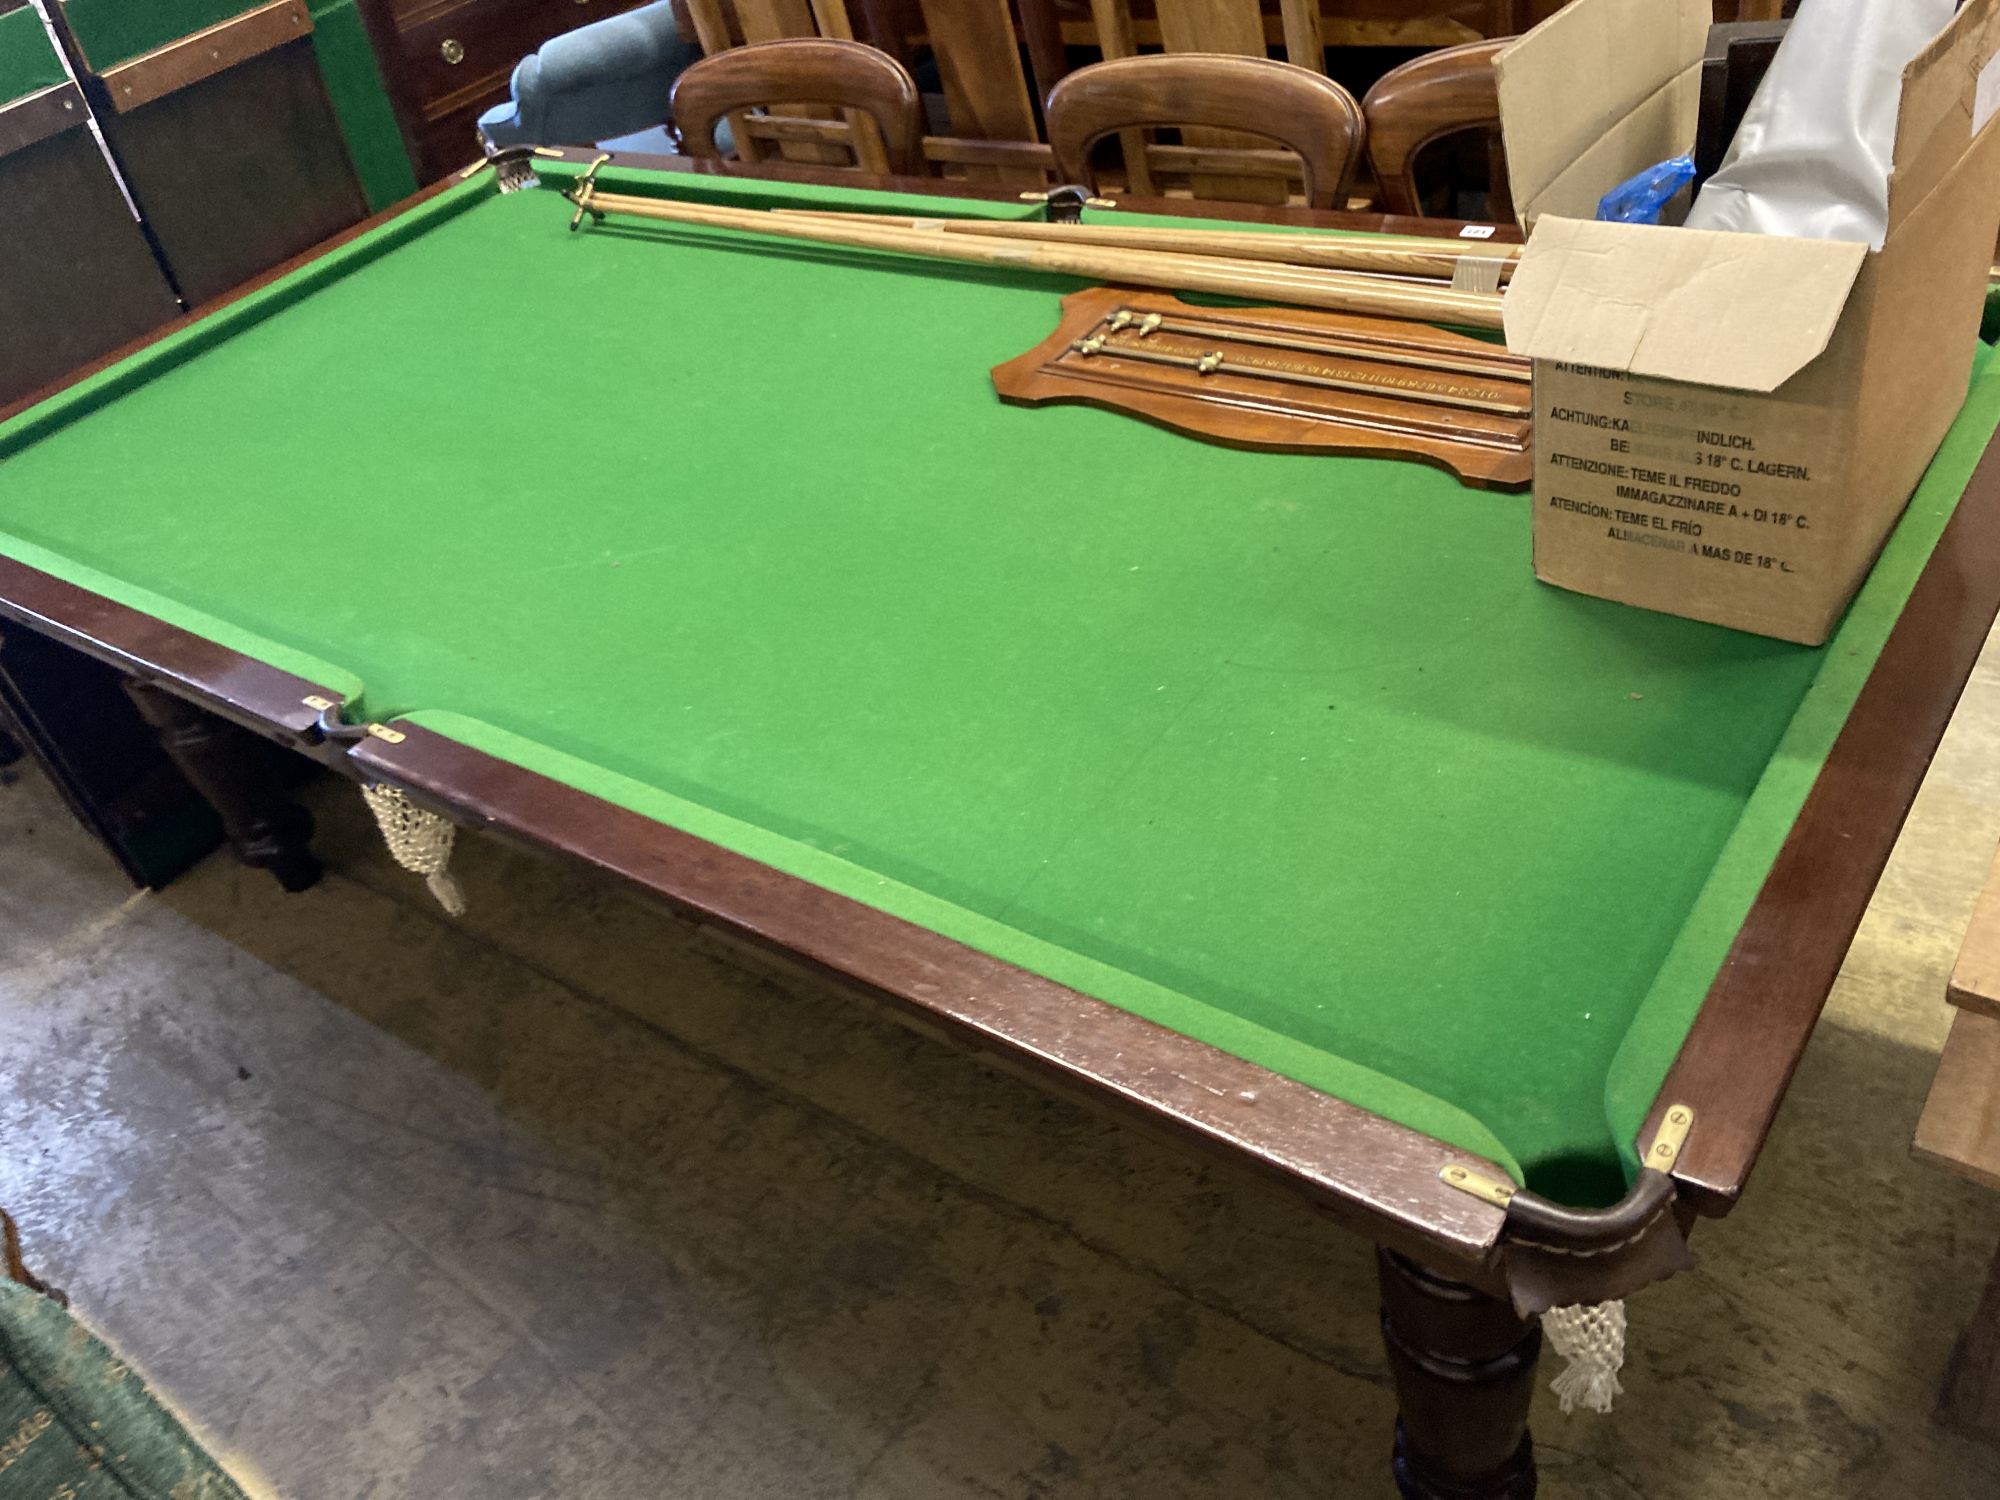 An Edwardian mahogany dining / snooker table with five section removable top and accessories, length 230cm, depth 120cm, height 78cm (h